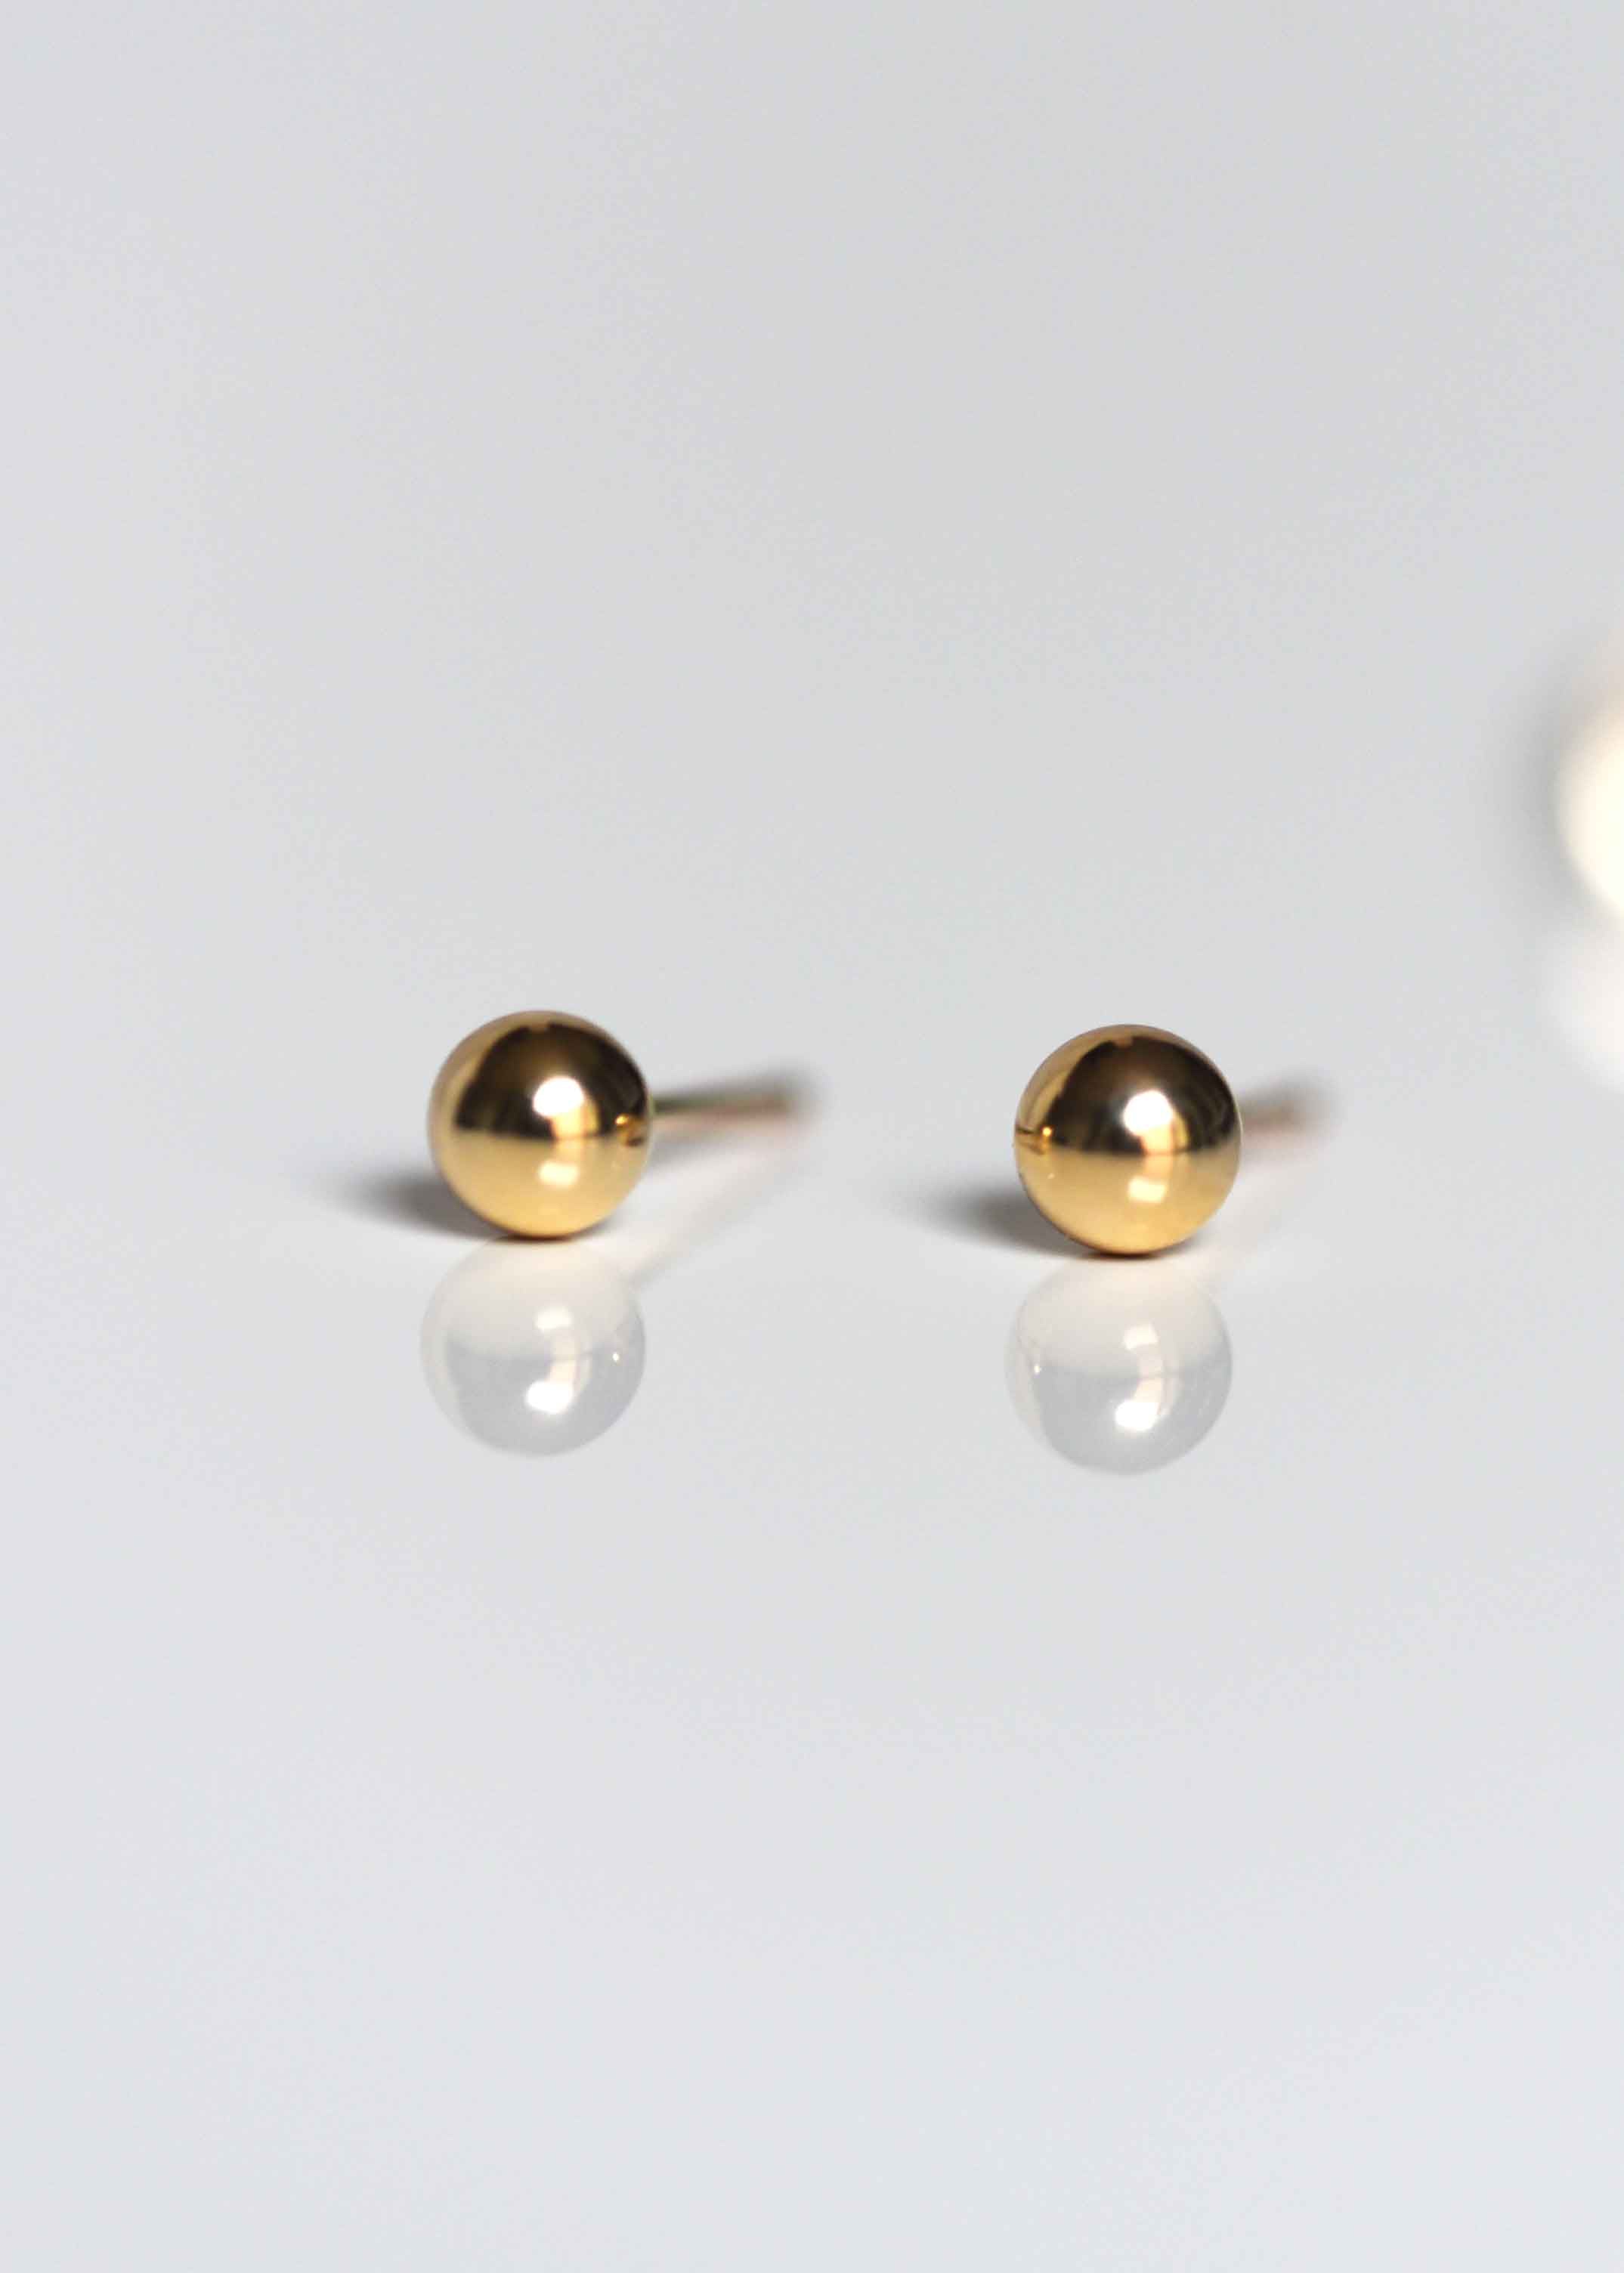 simple gold studs, small earrings hypoallergenic gold filled